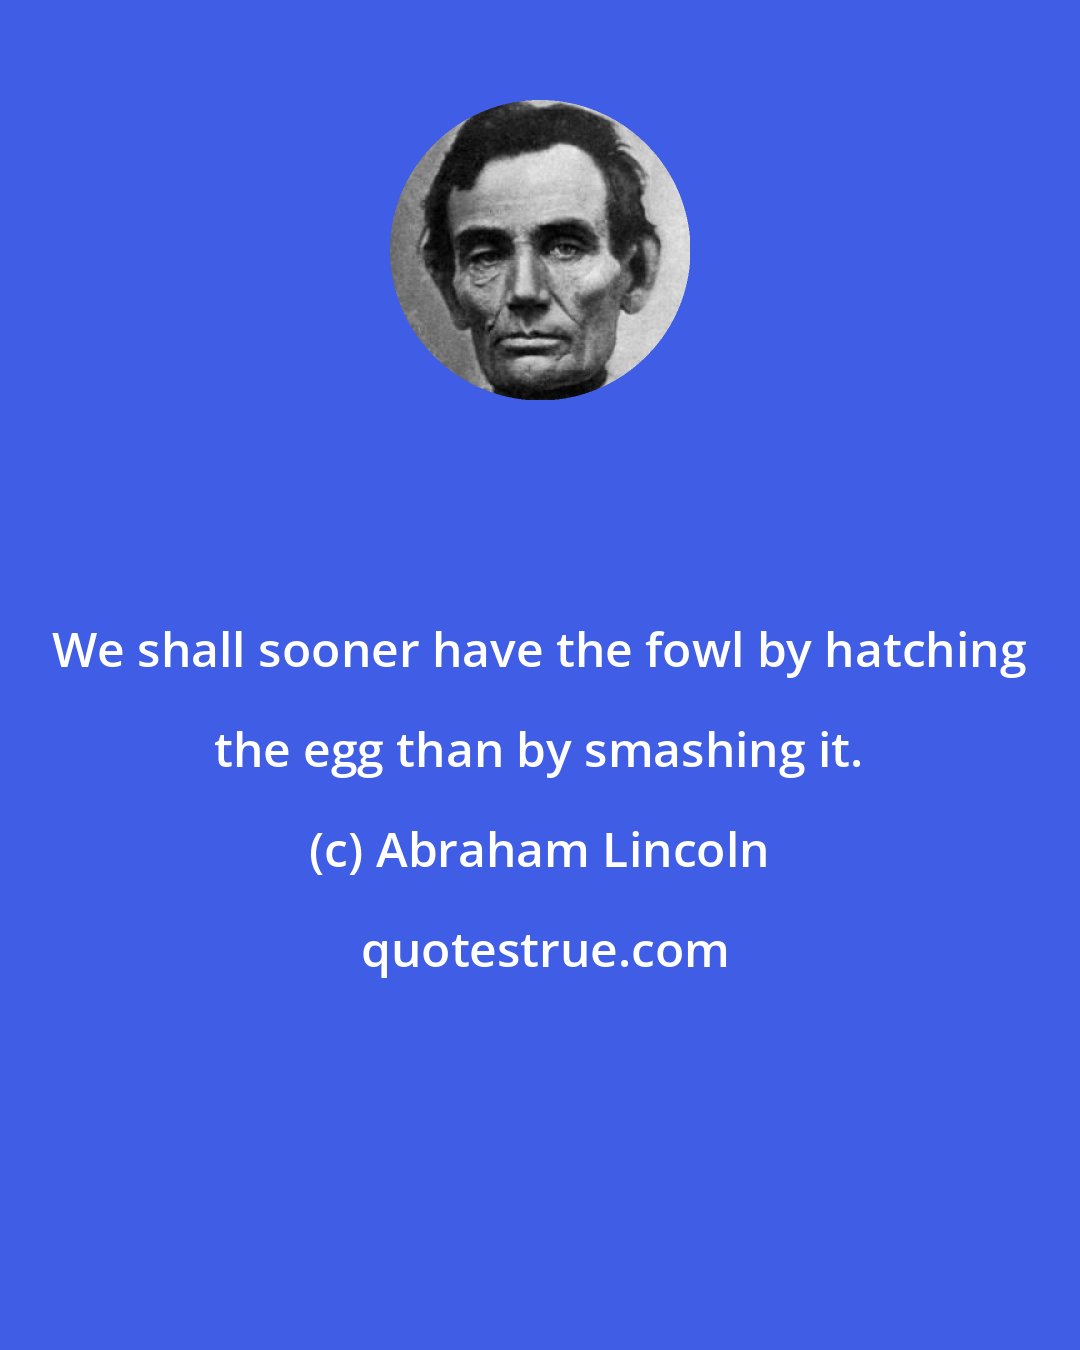 Abraham Lincoln: We shall sooner have the fowl by hatching the egg than by smashing it.